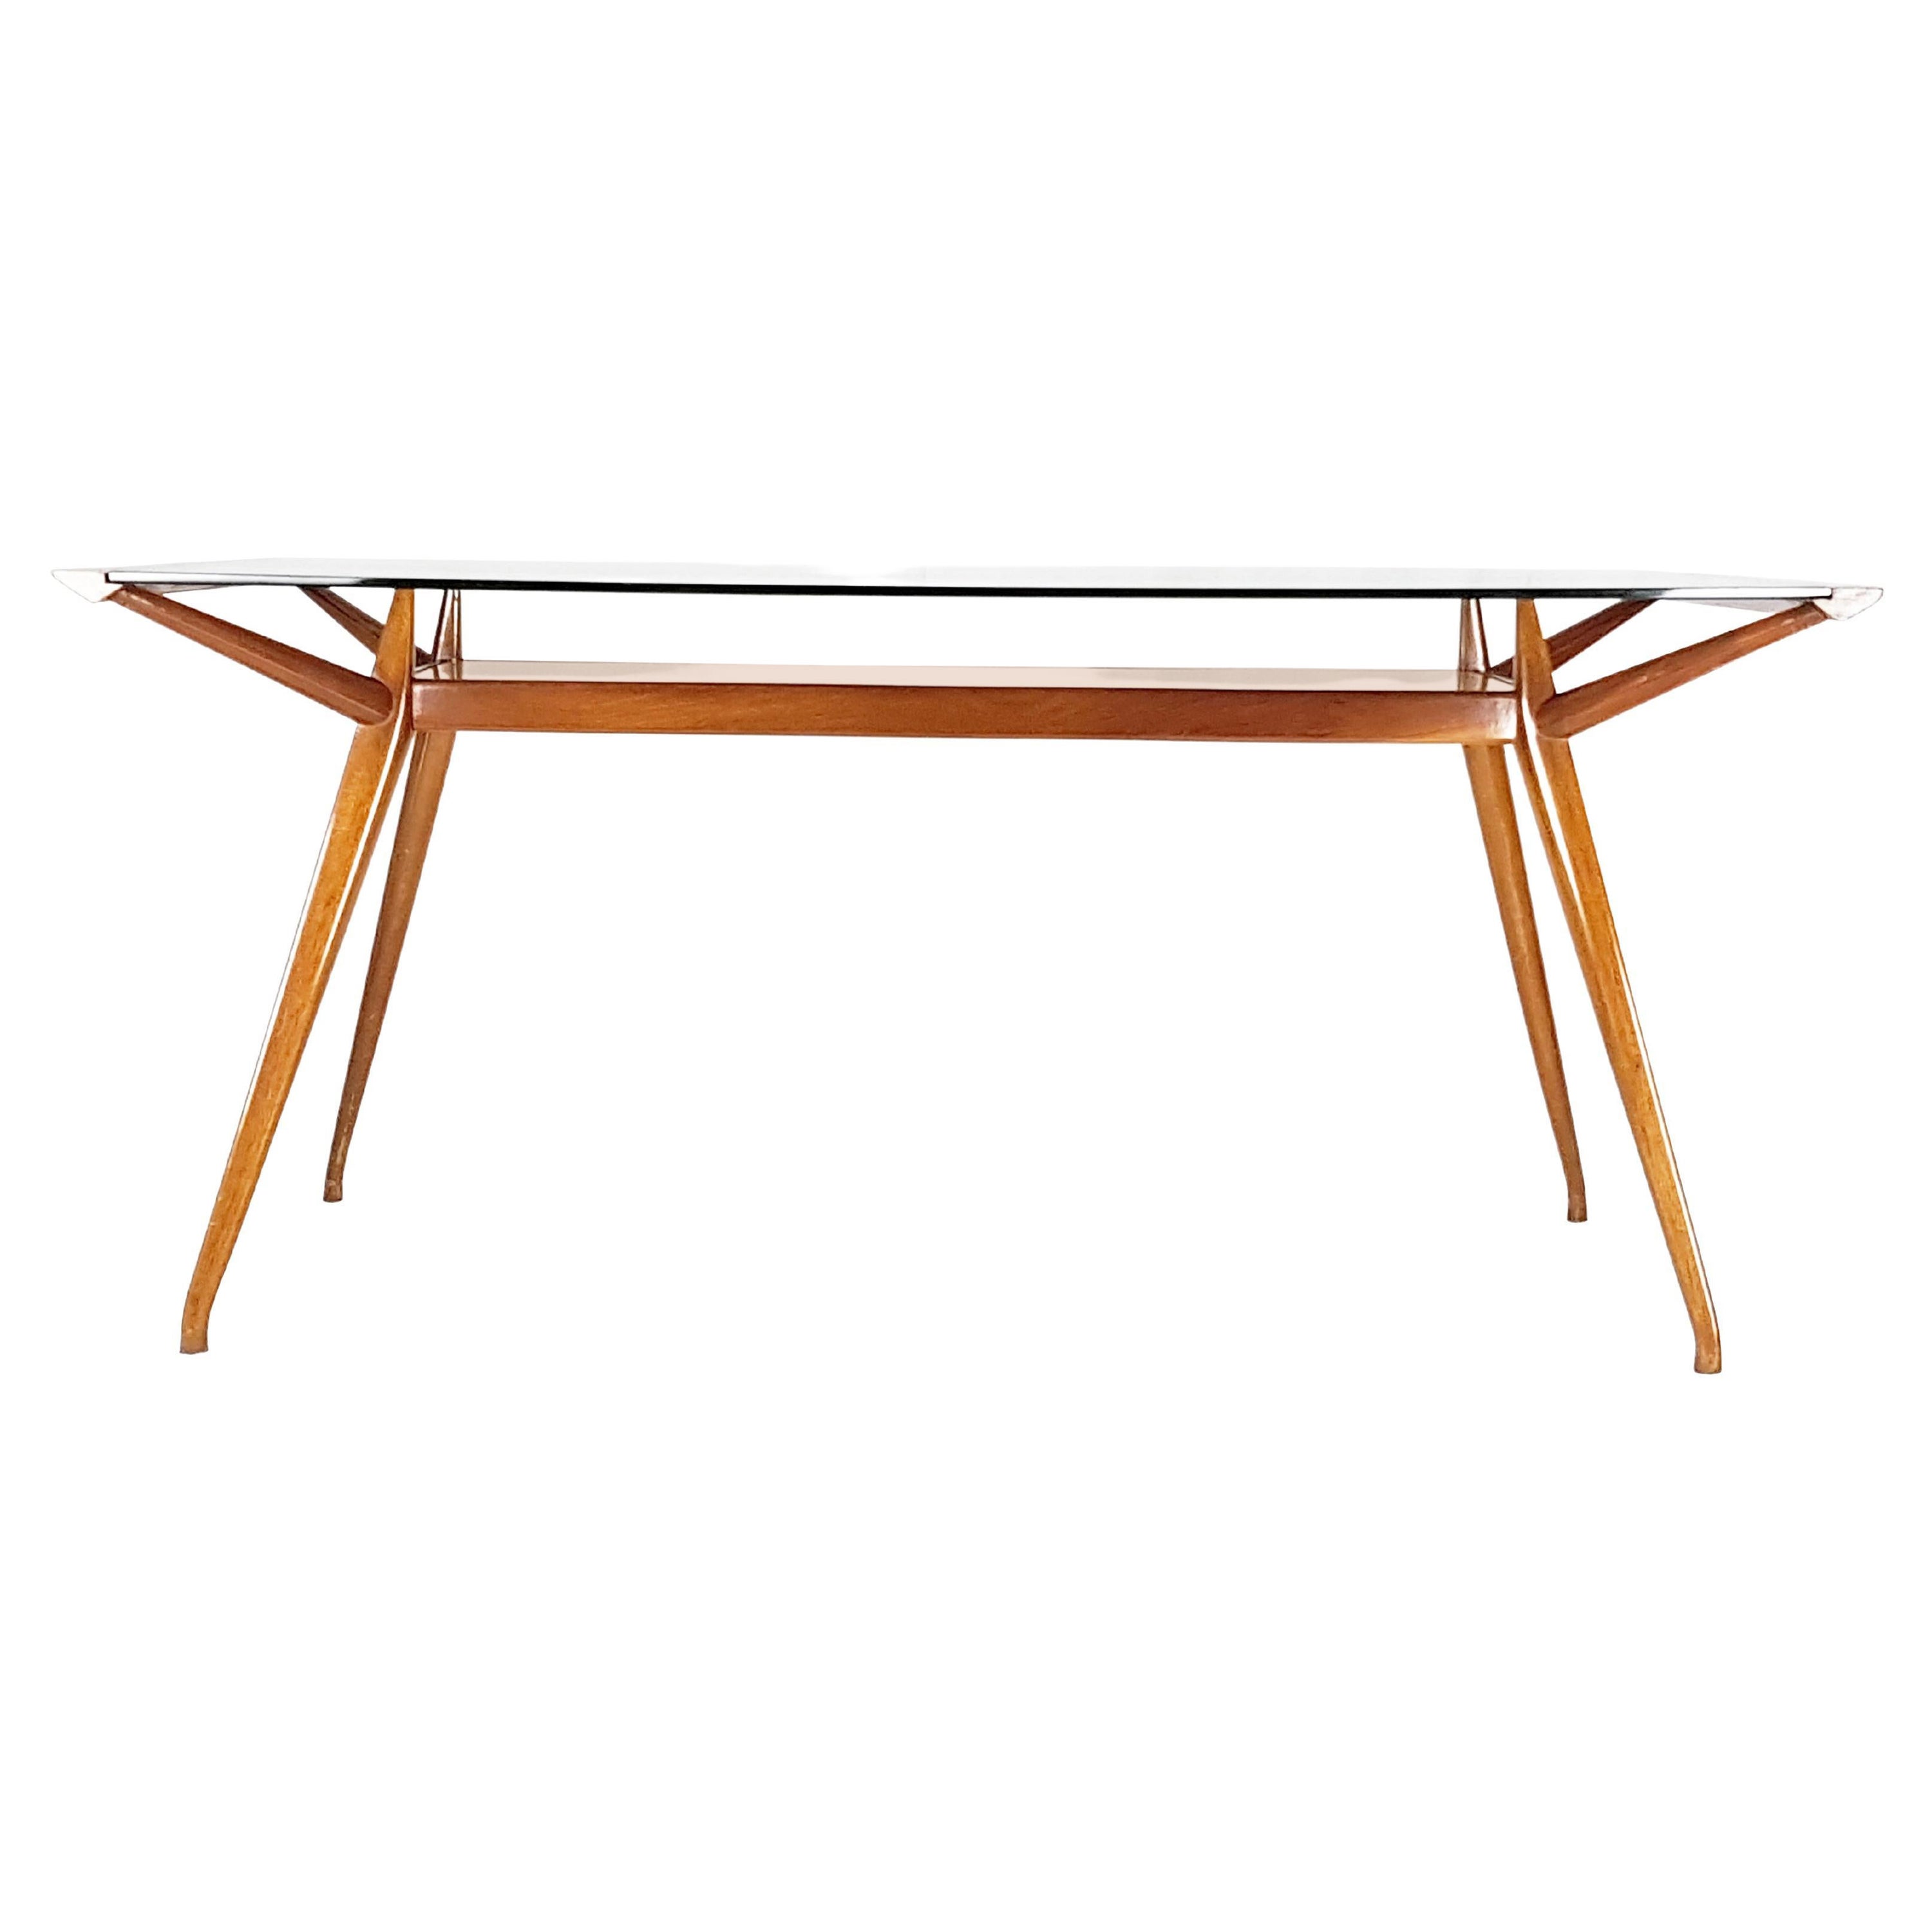 Italian Beech wood & Glass Mid-Century Modern dining table attributed to ISA For Sale